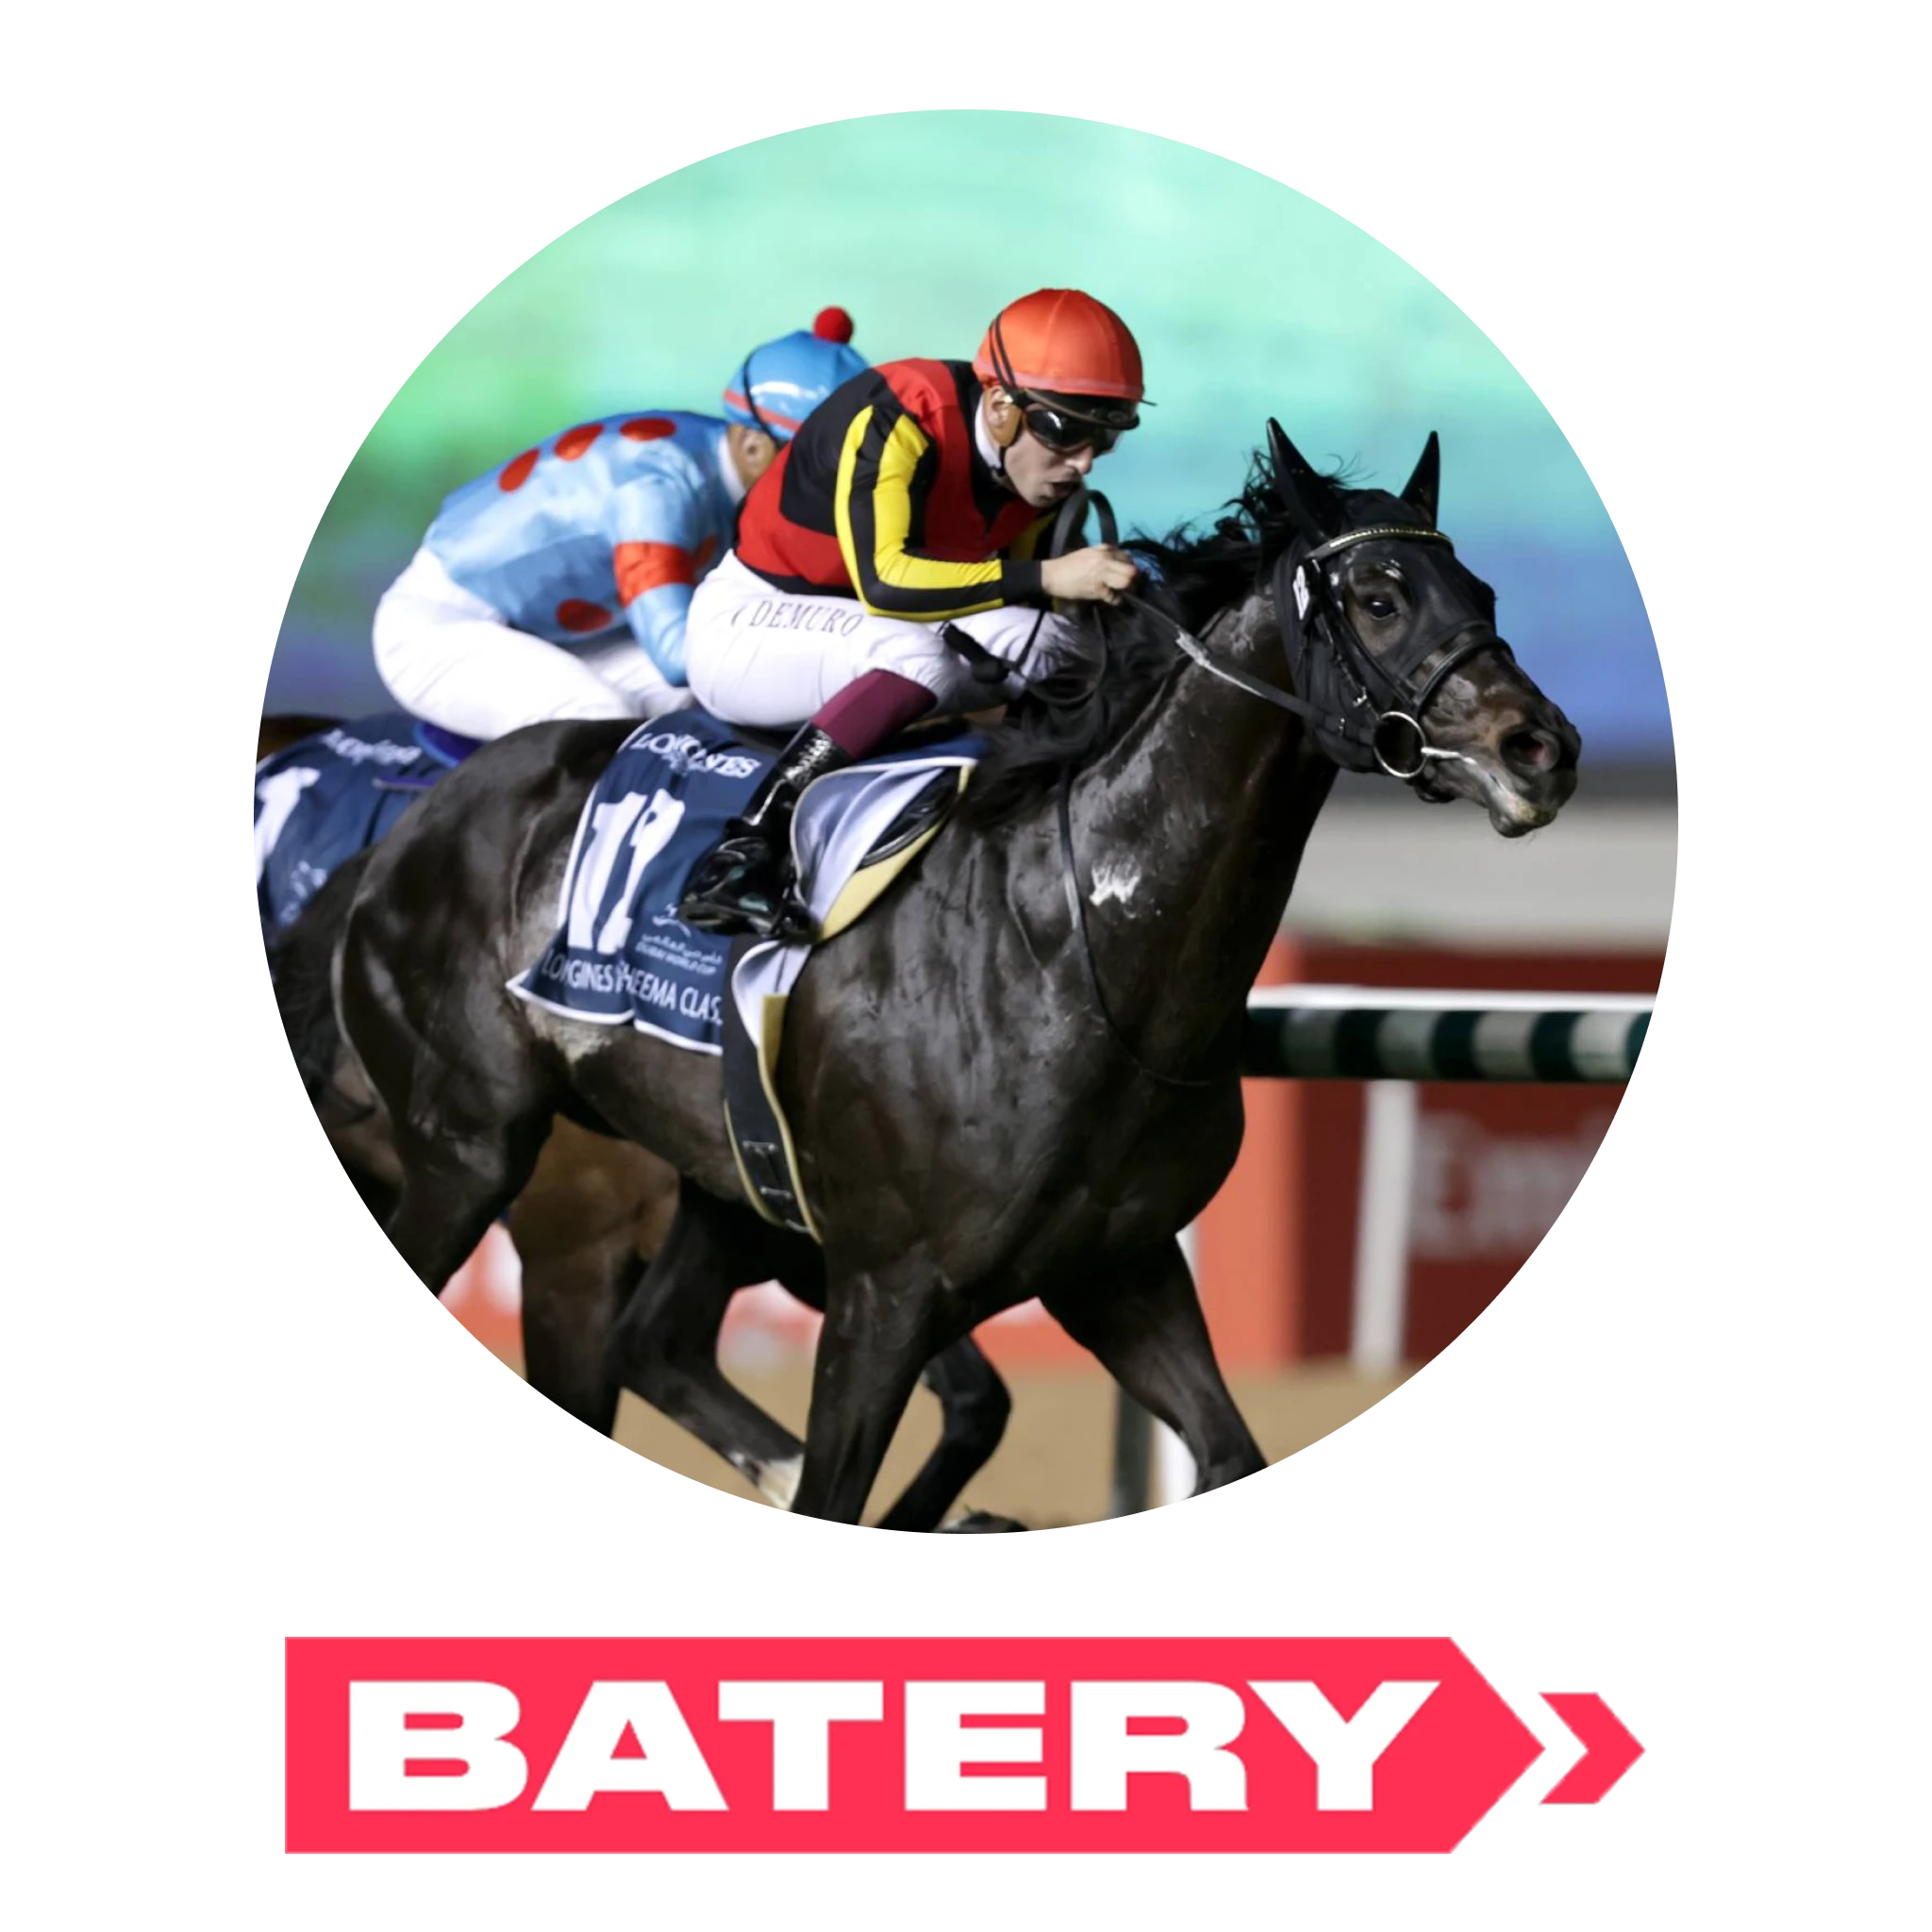 Horse racing betting on Batery is safe for Indians.